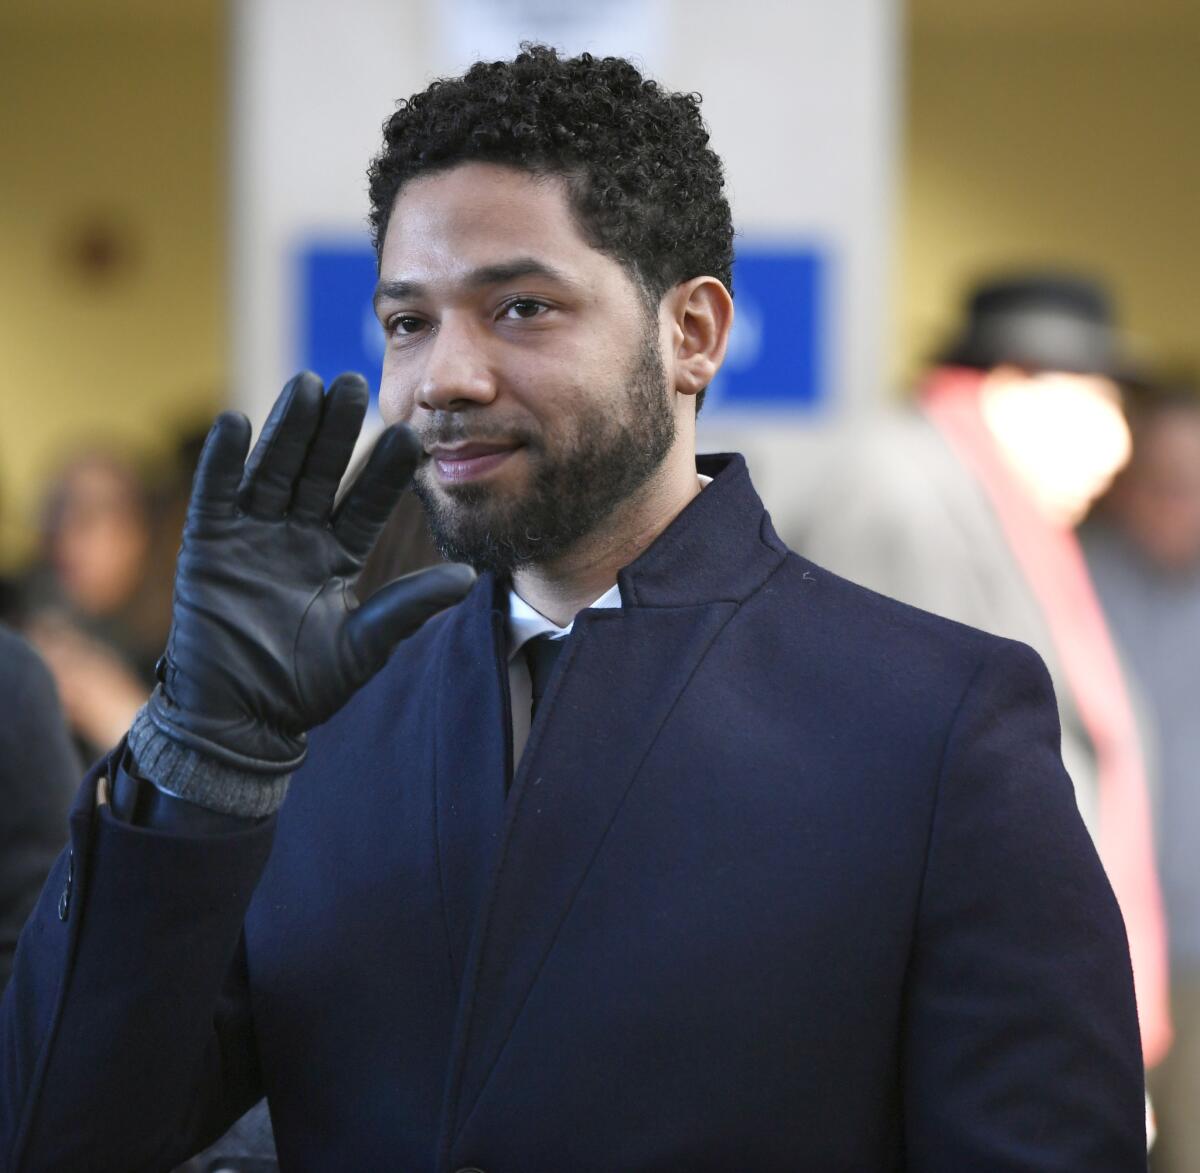 Jussie Smollett waves to supporters before leaving Cook County Court after his charges were dropped Tuesday.